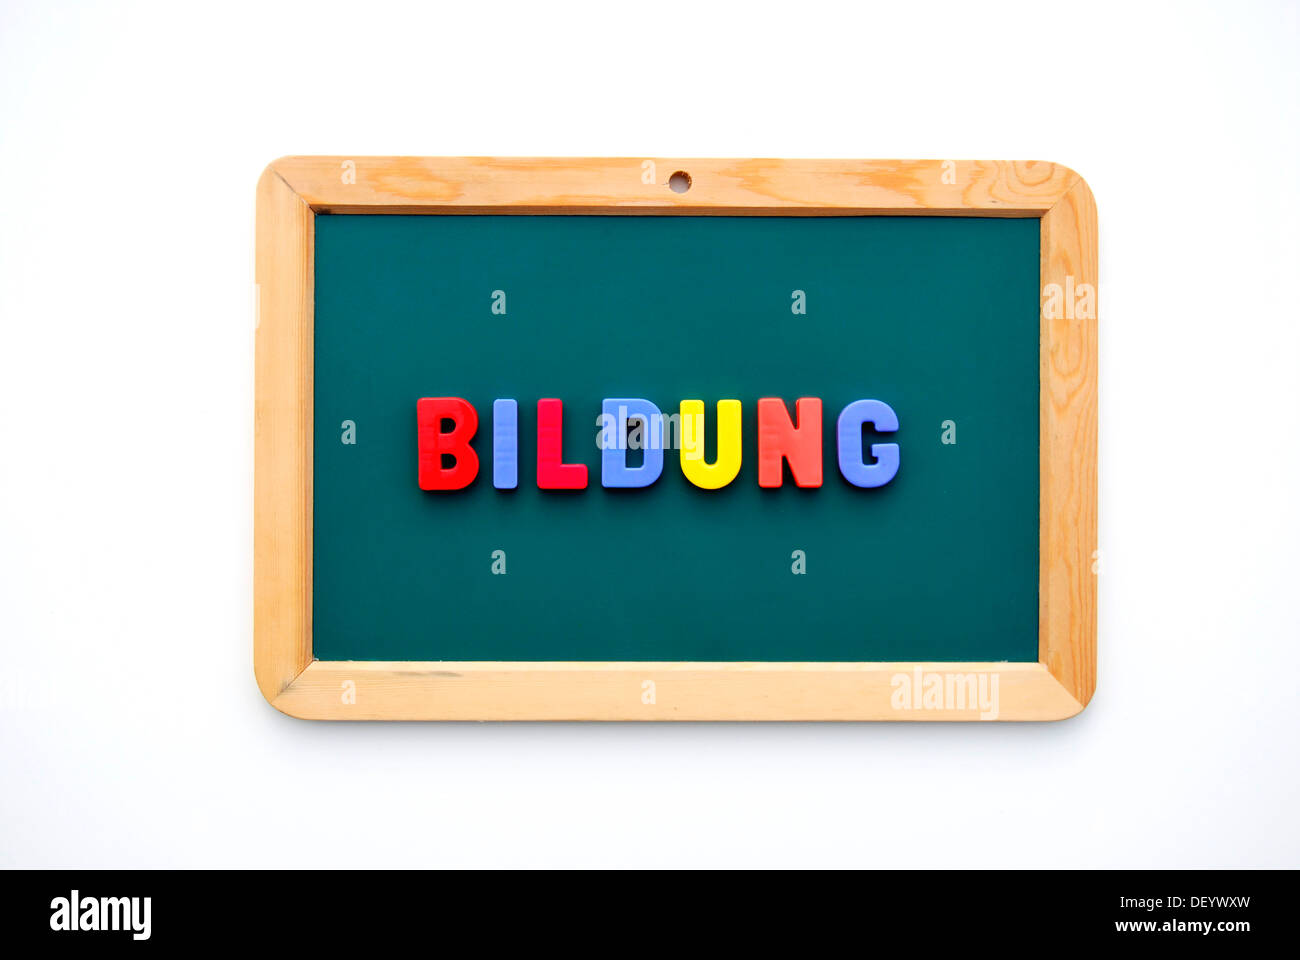 Bildung, German term for education, written with colourful magnetic letters on a child's blackboard Stock Photo